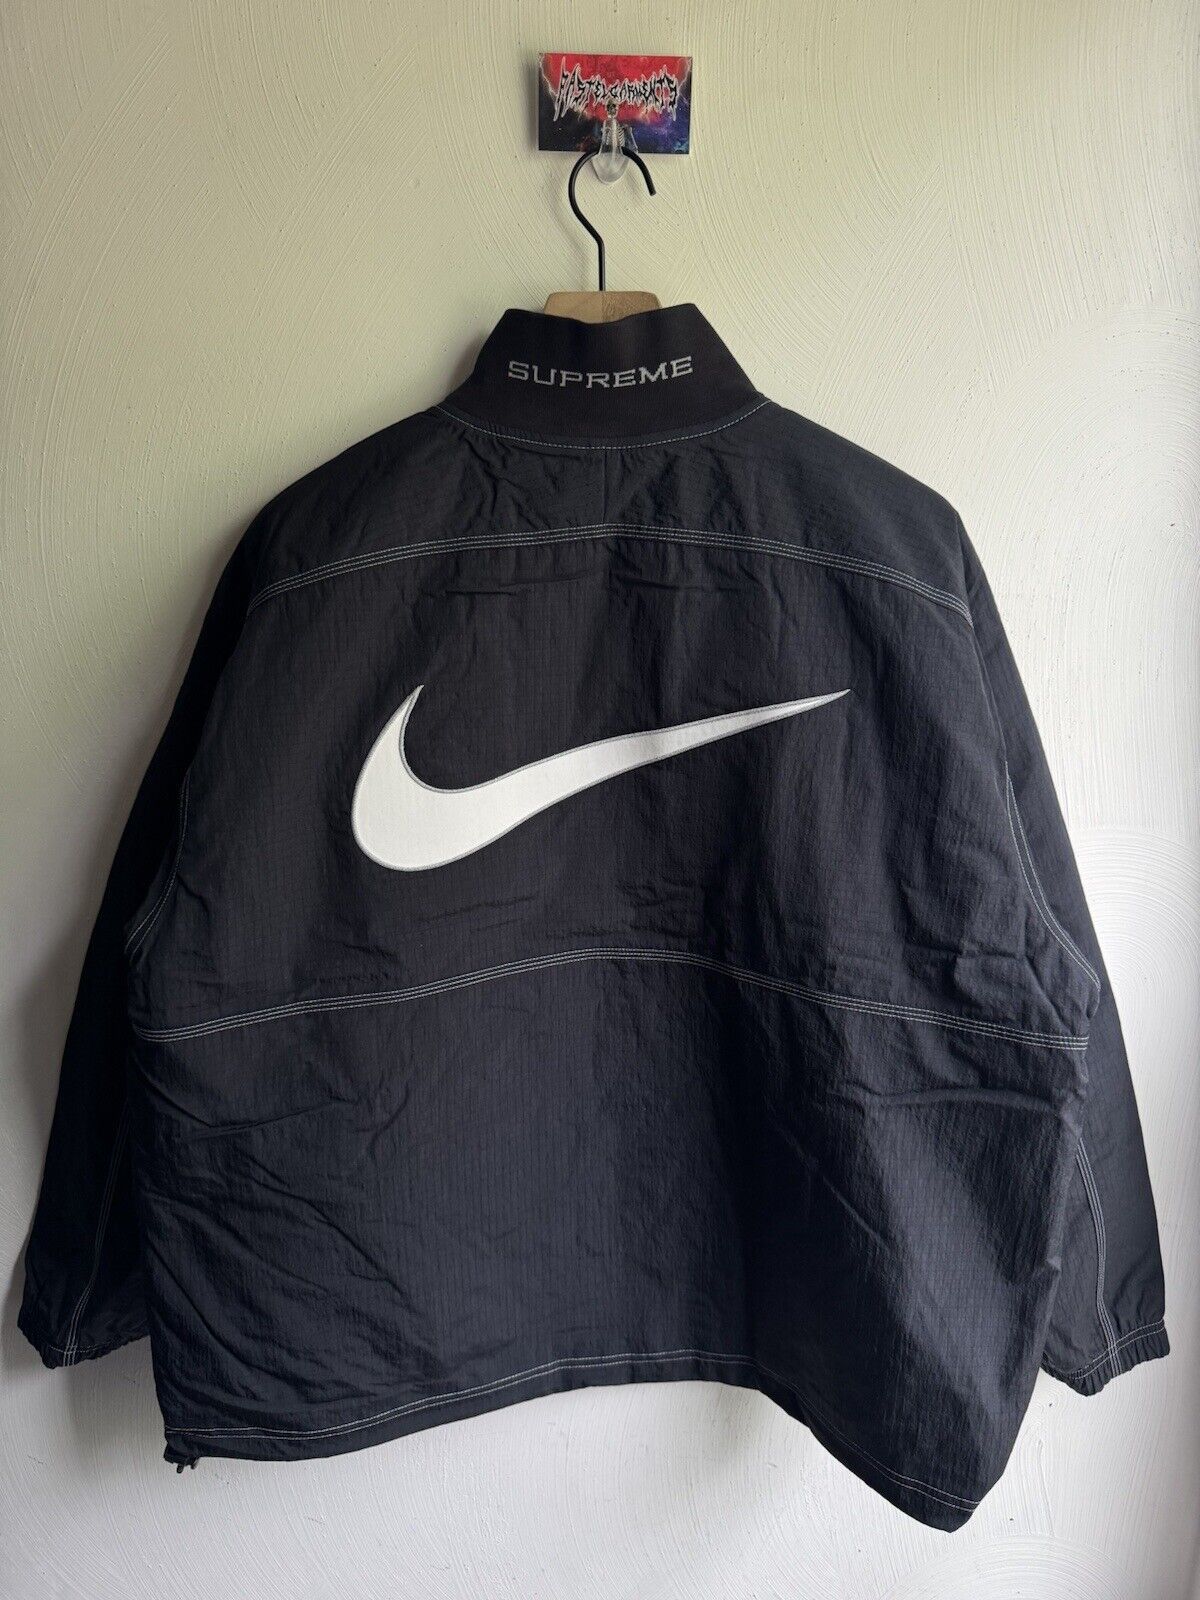 Supreme Nike Ripstop Pullover Jacket Black SS24 Size M Medium BRAND NEW IN HAND